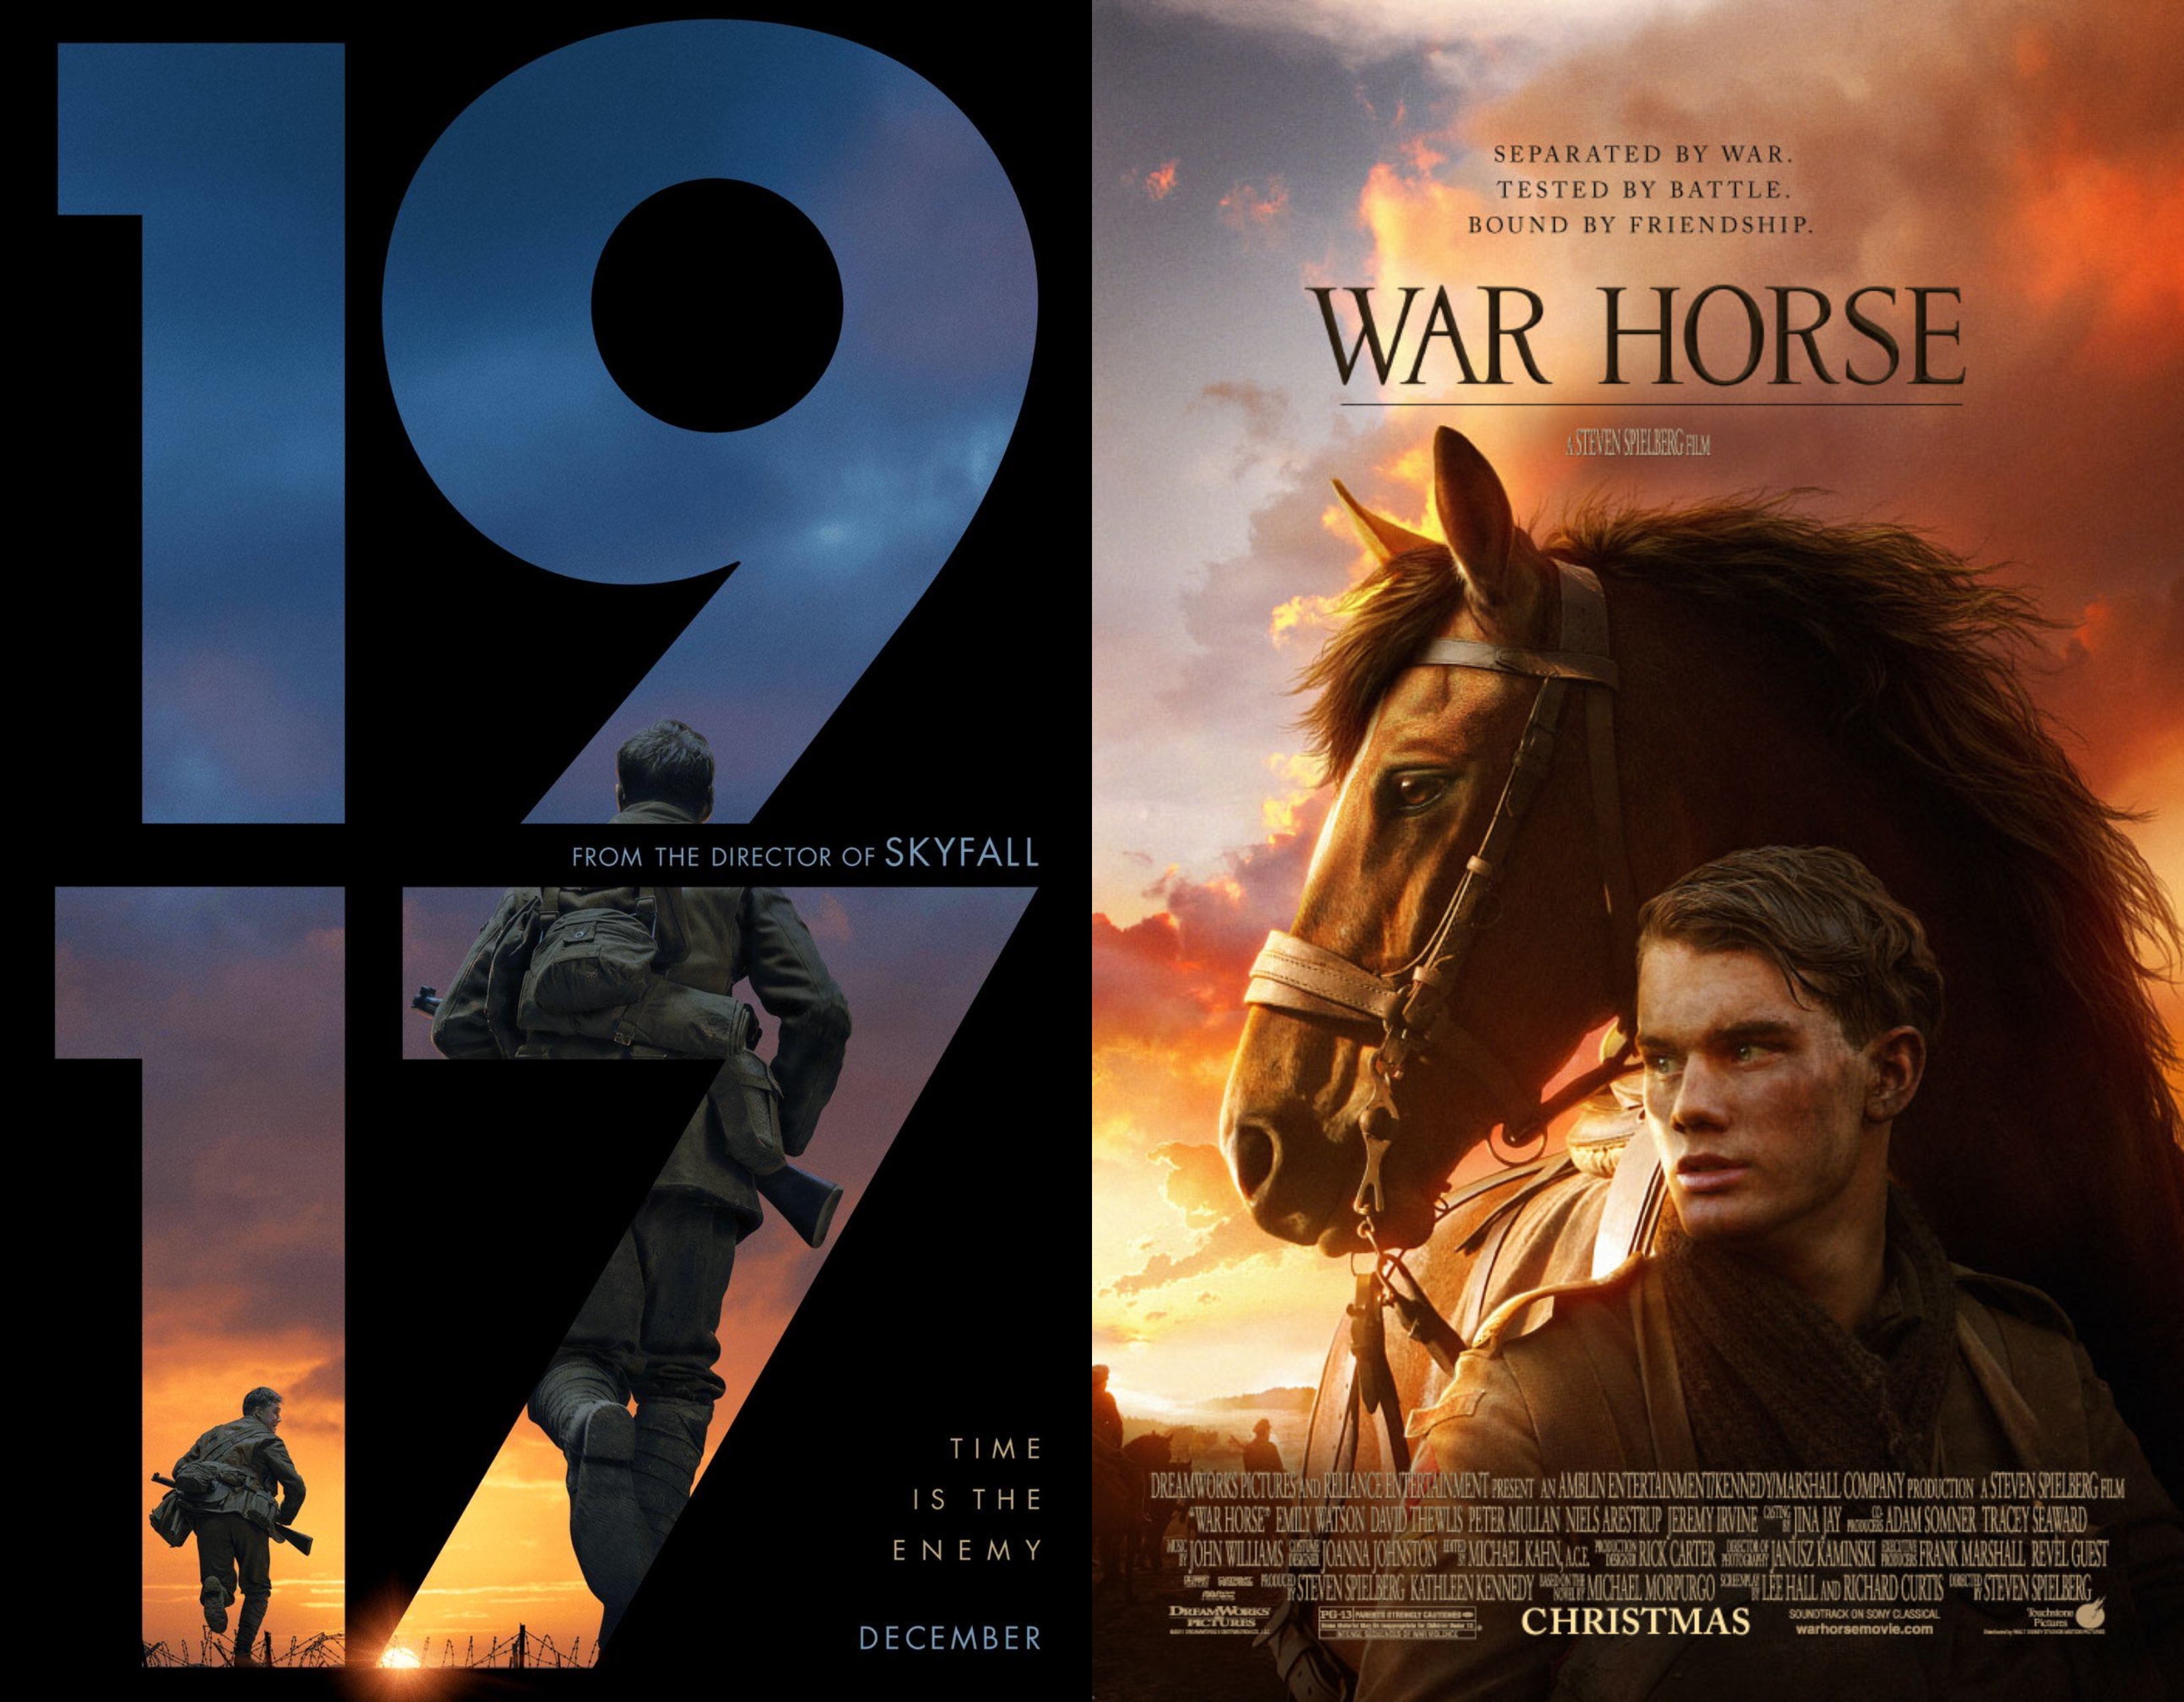 Posters for 1917 and War Horse